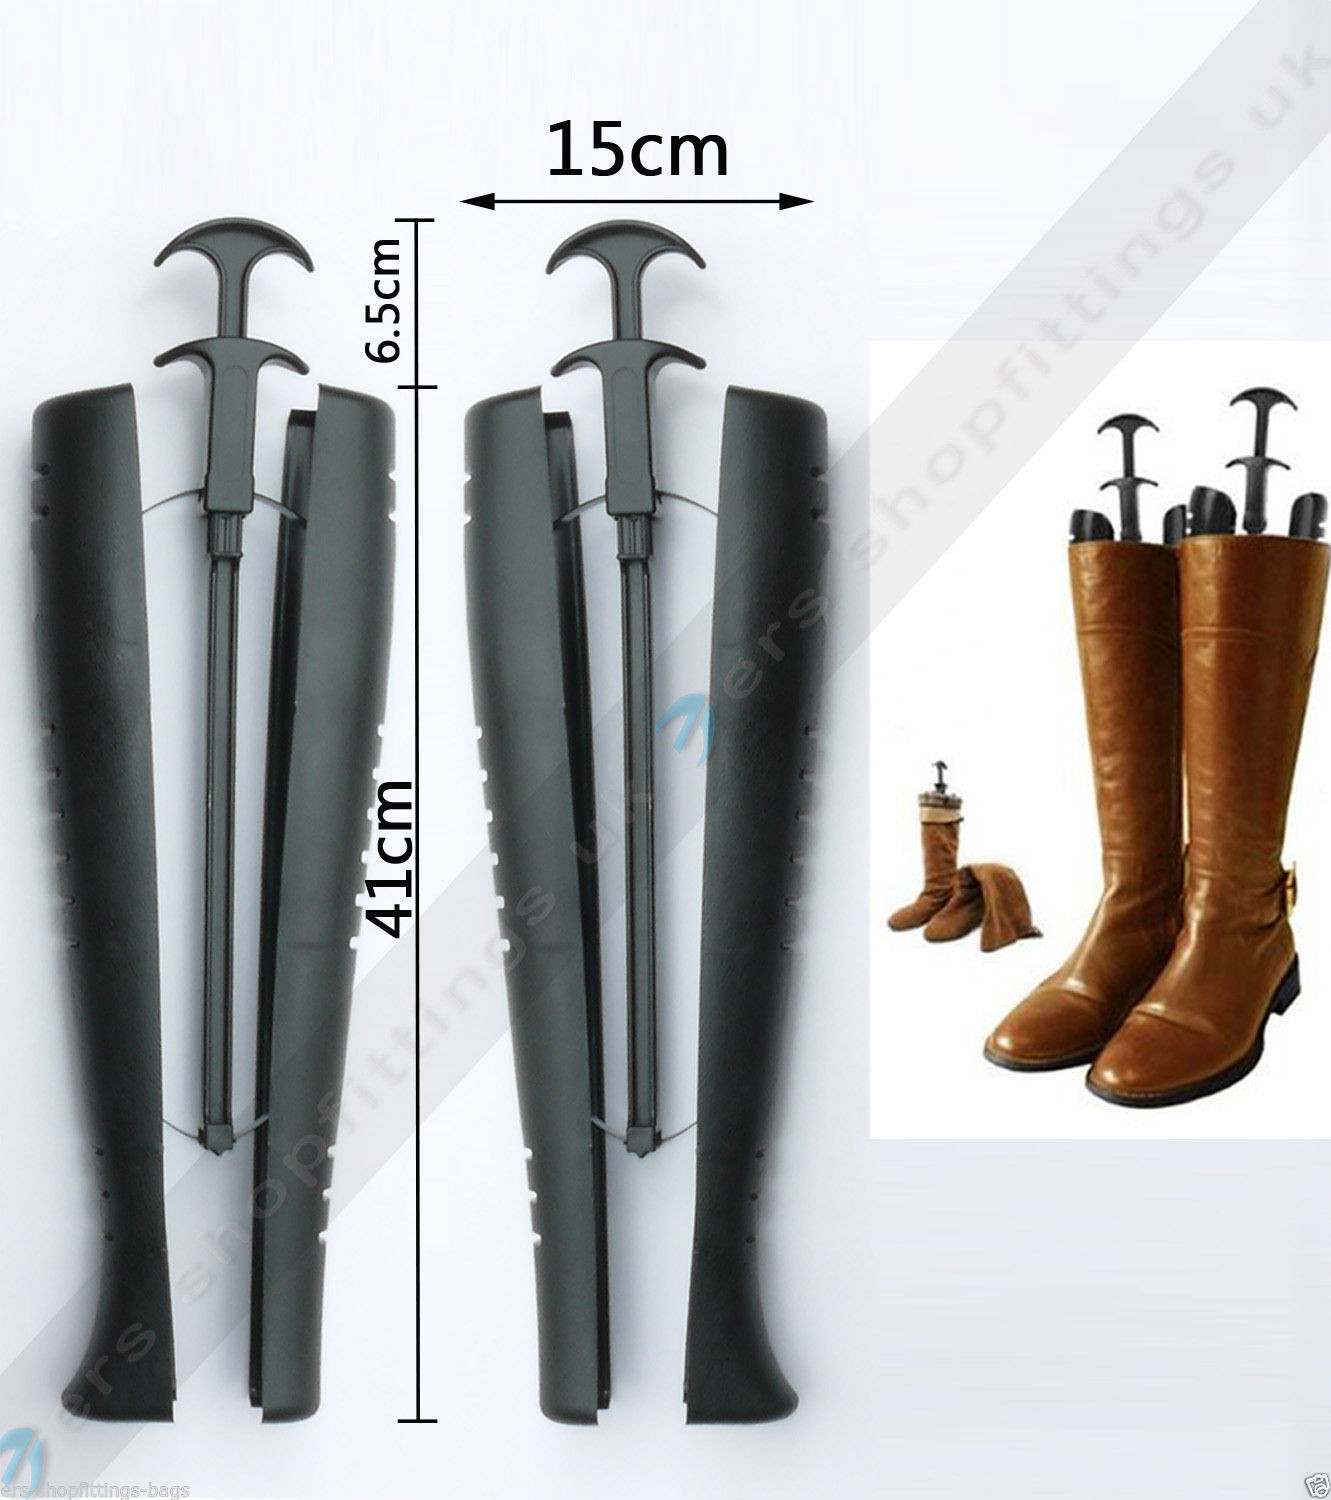 1 Pair Automatic Black Boot Shapers Stand Holder Shoe Tree